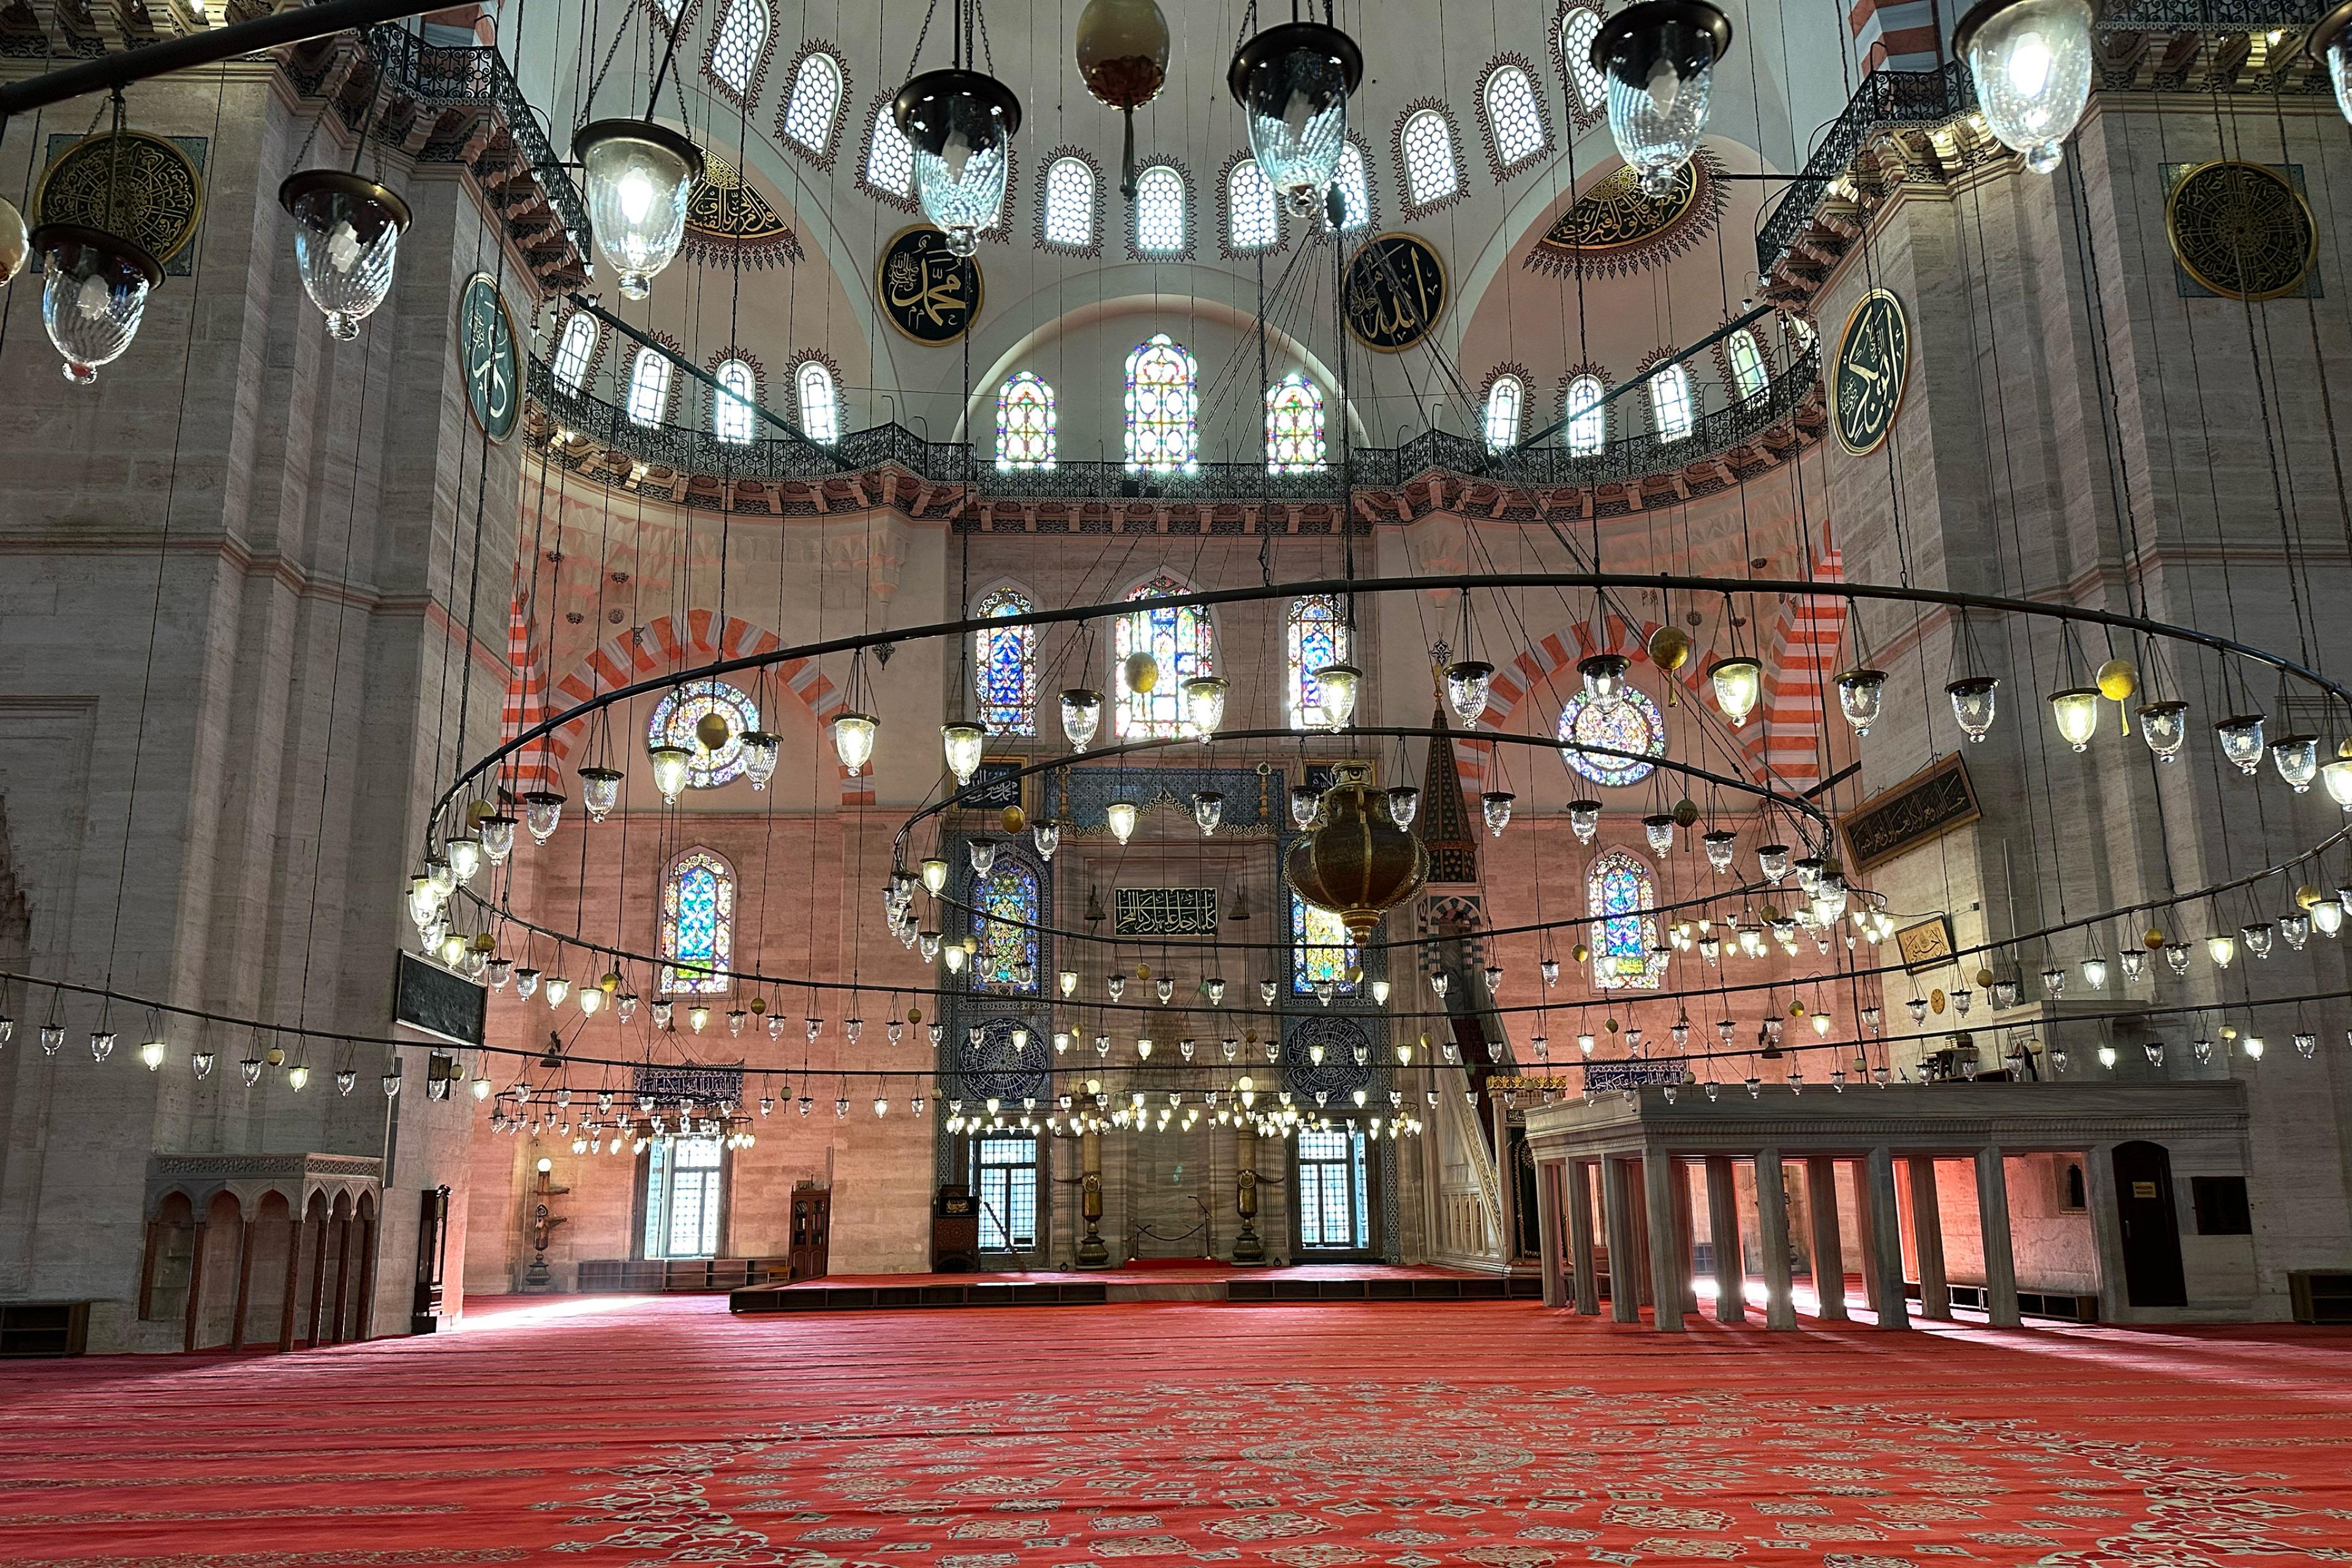 mosque interior with massive round candle holders